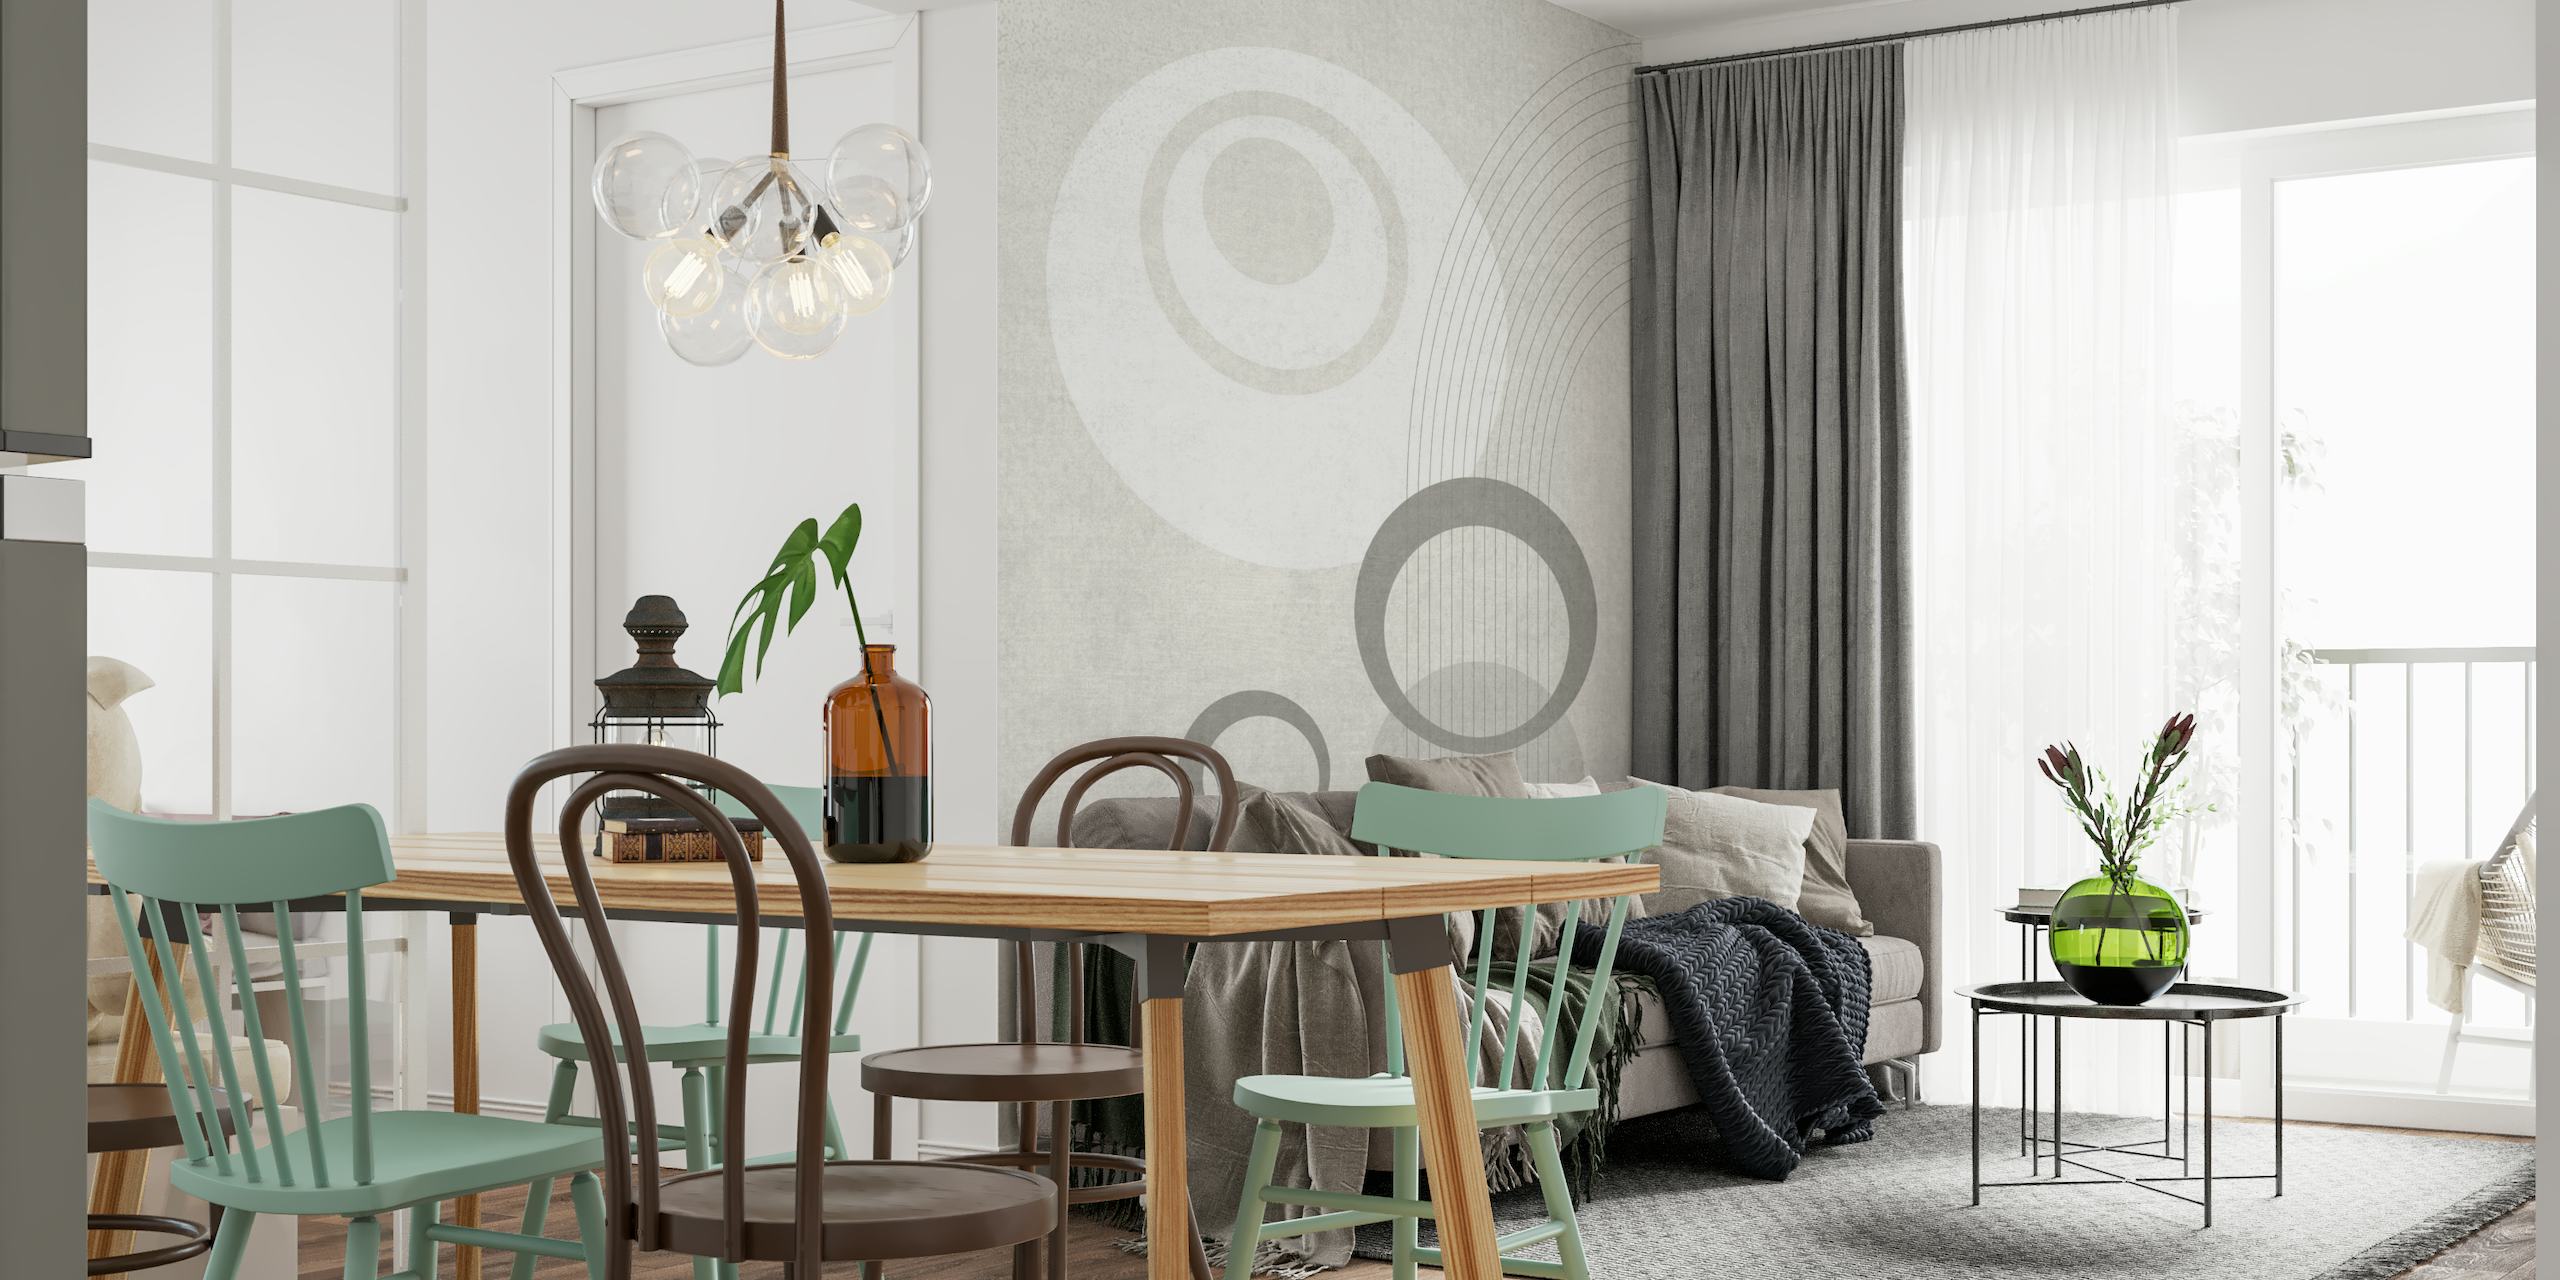 Mid-Century Modern - Joy wall mural depicting abstract geometric shapes in a monochromatic palette.